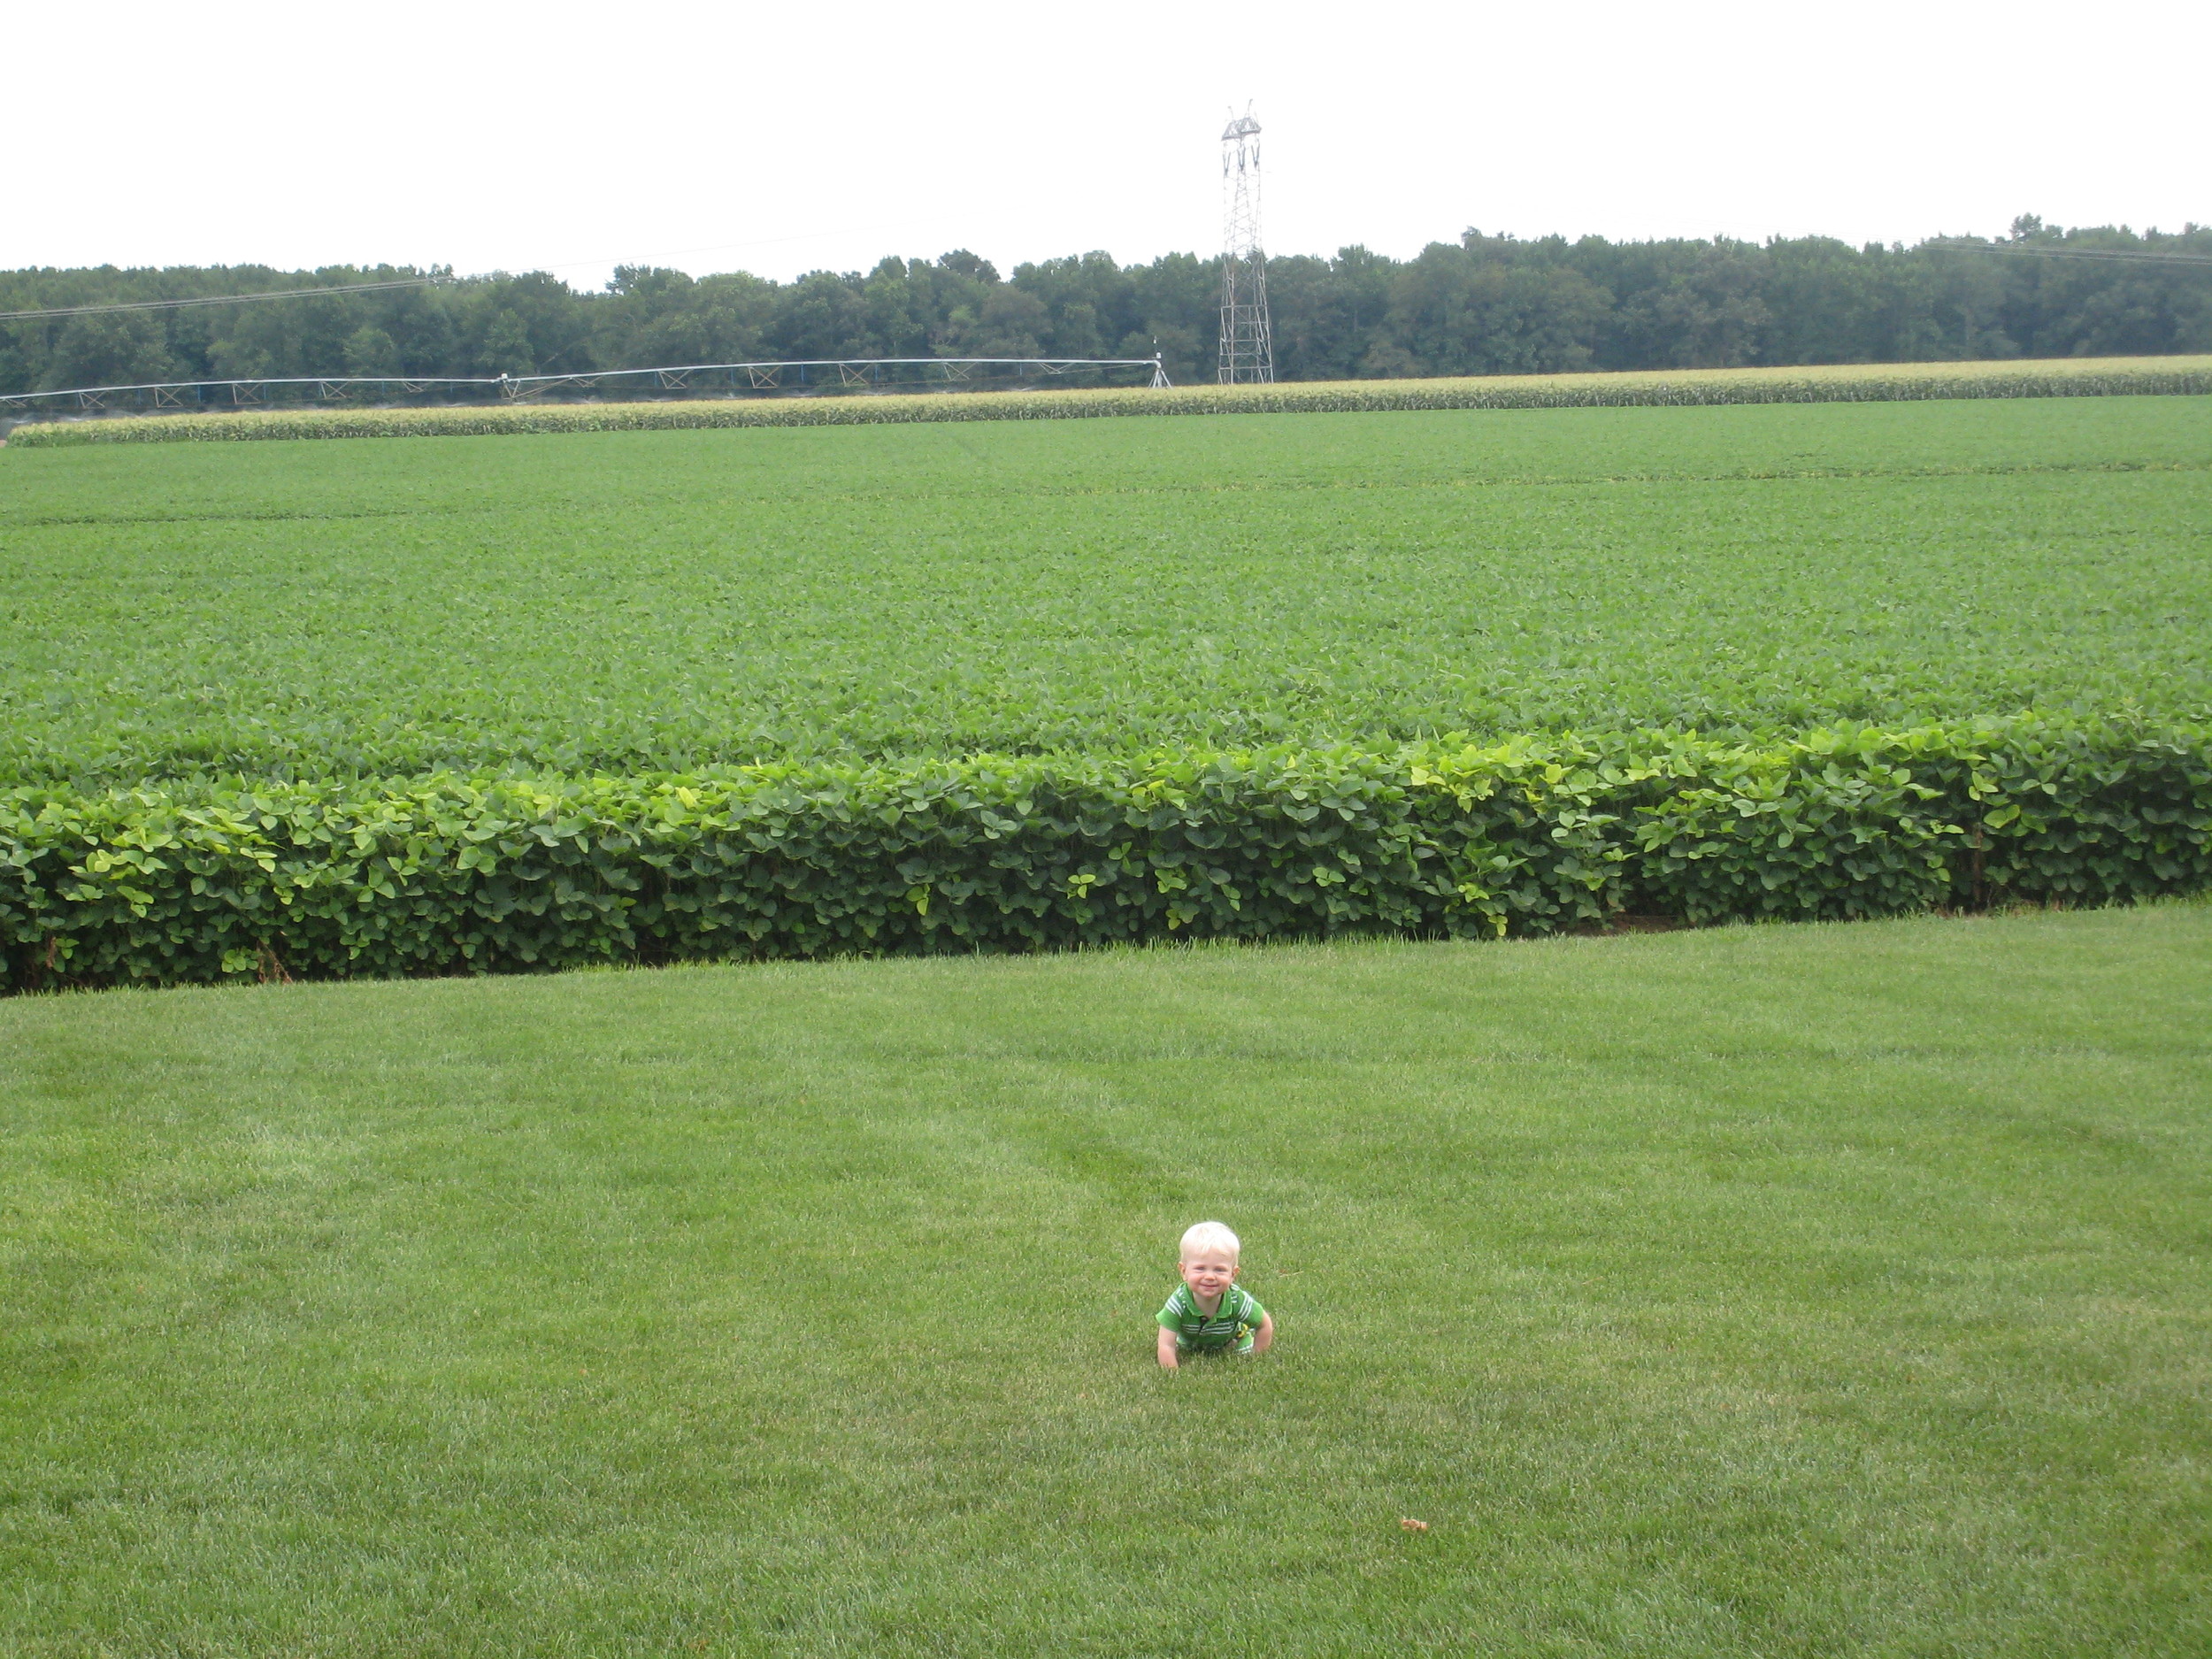  Lee Coombs in front of soybeans at Joe Coombs Farm, 2010 